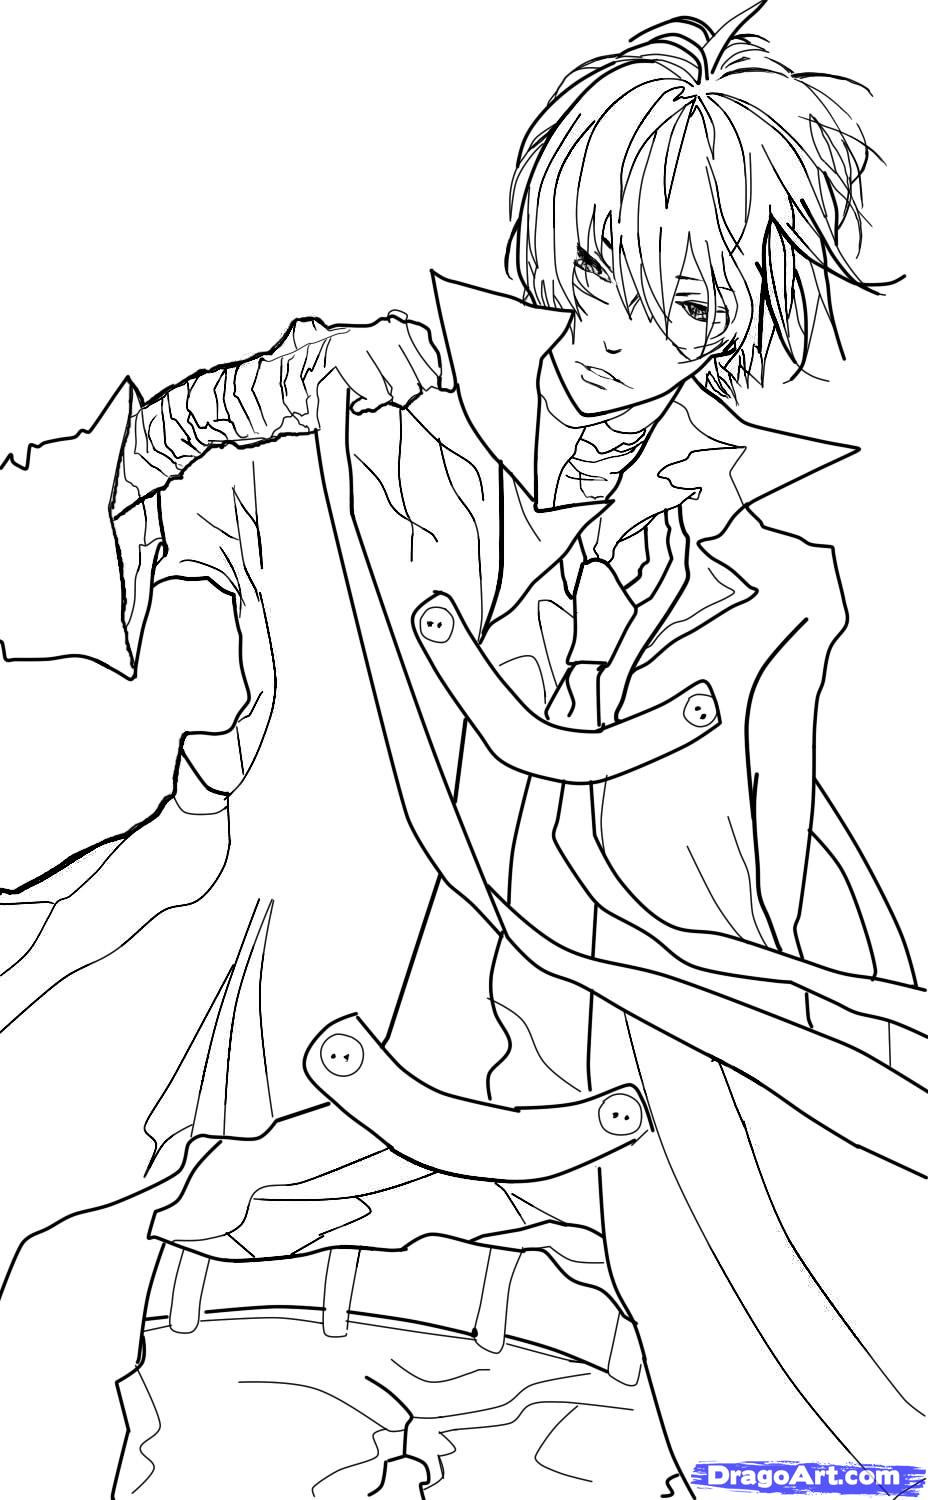 Anime Coloring Pages Boy And Girl
 How to Sketch an Anime Boy Step by Step Anime People